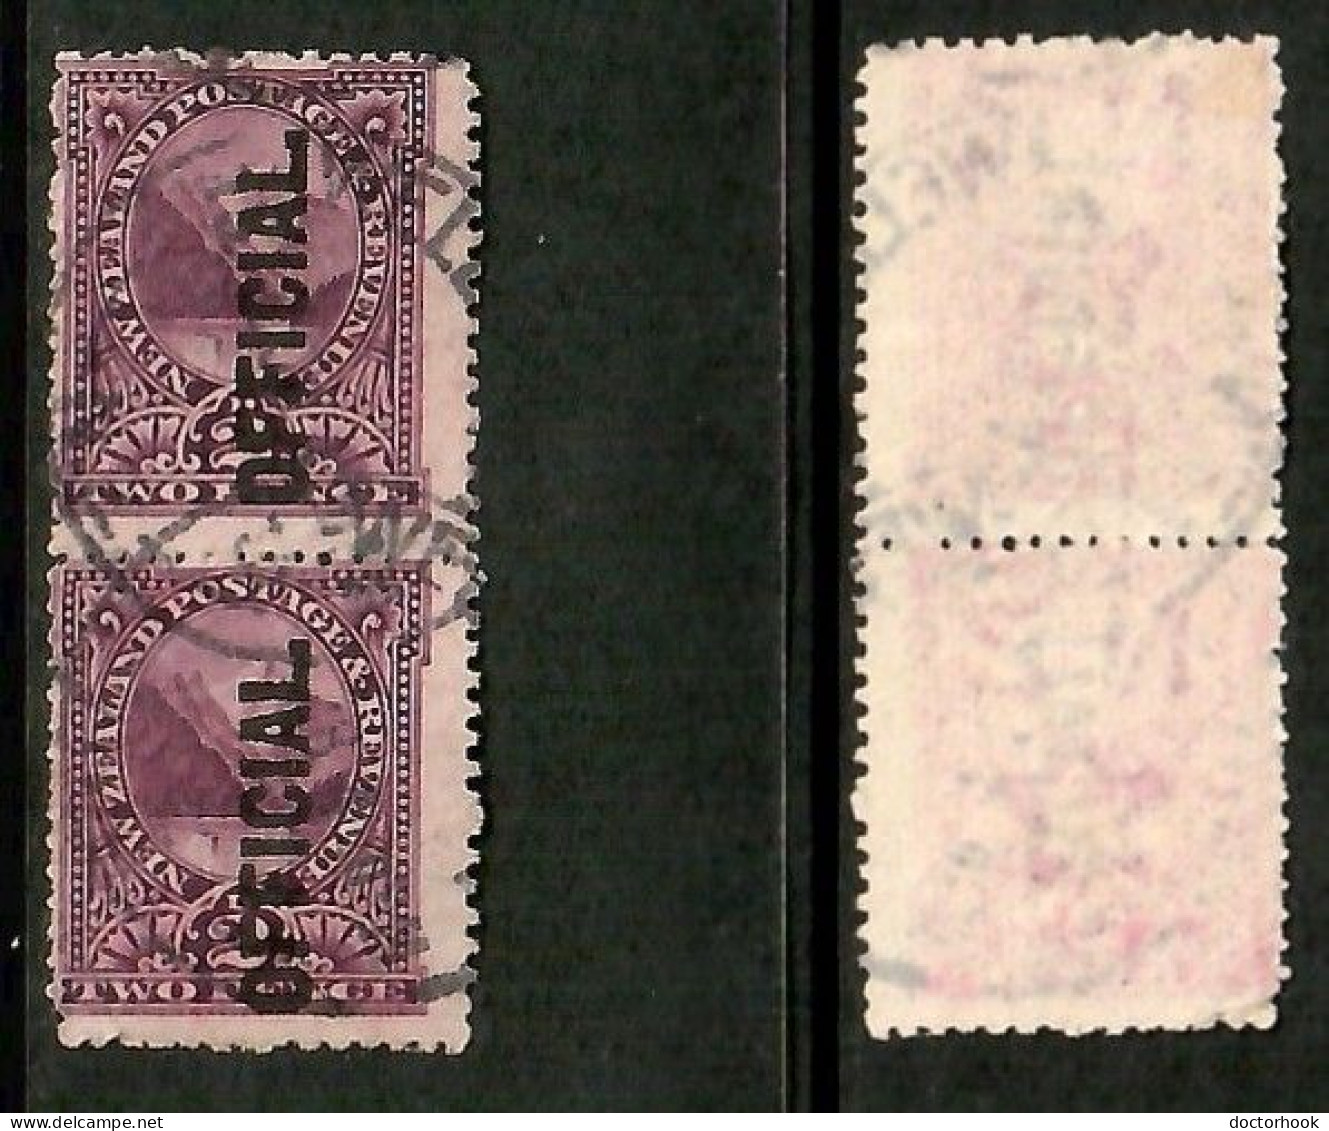 NEW ZEALAND    Scott # O 26 USED PAIR (CONDITION PER SCAN) (Stamp Scan # 1042-5) - Oficiales